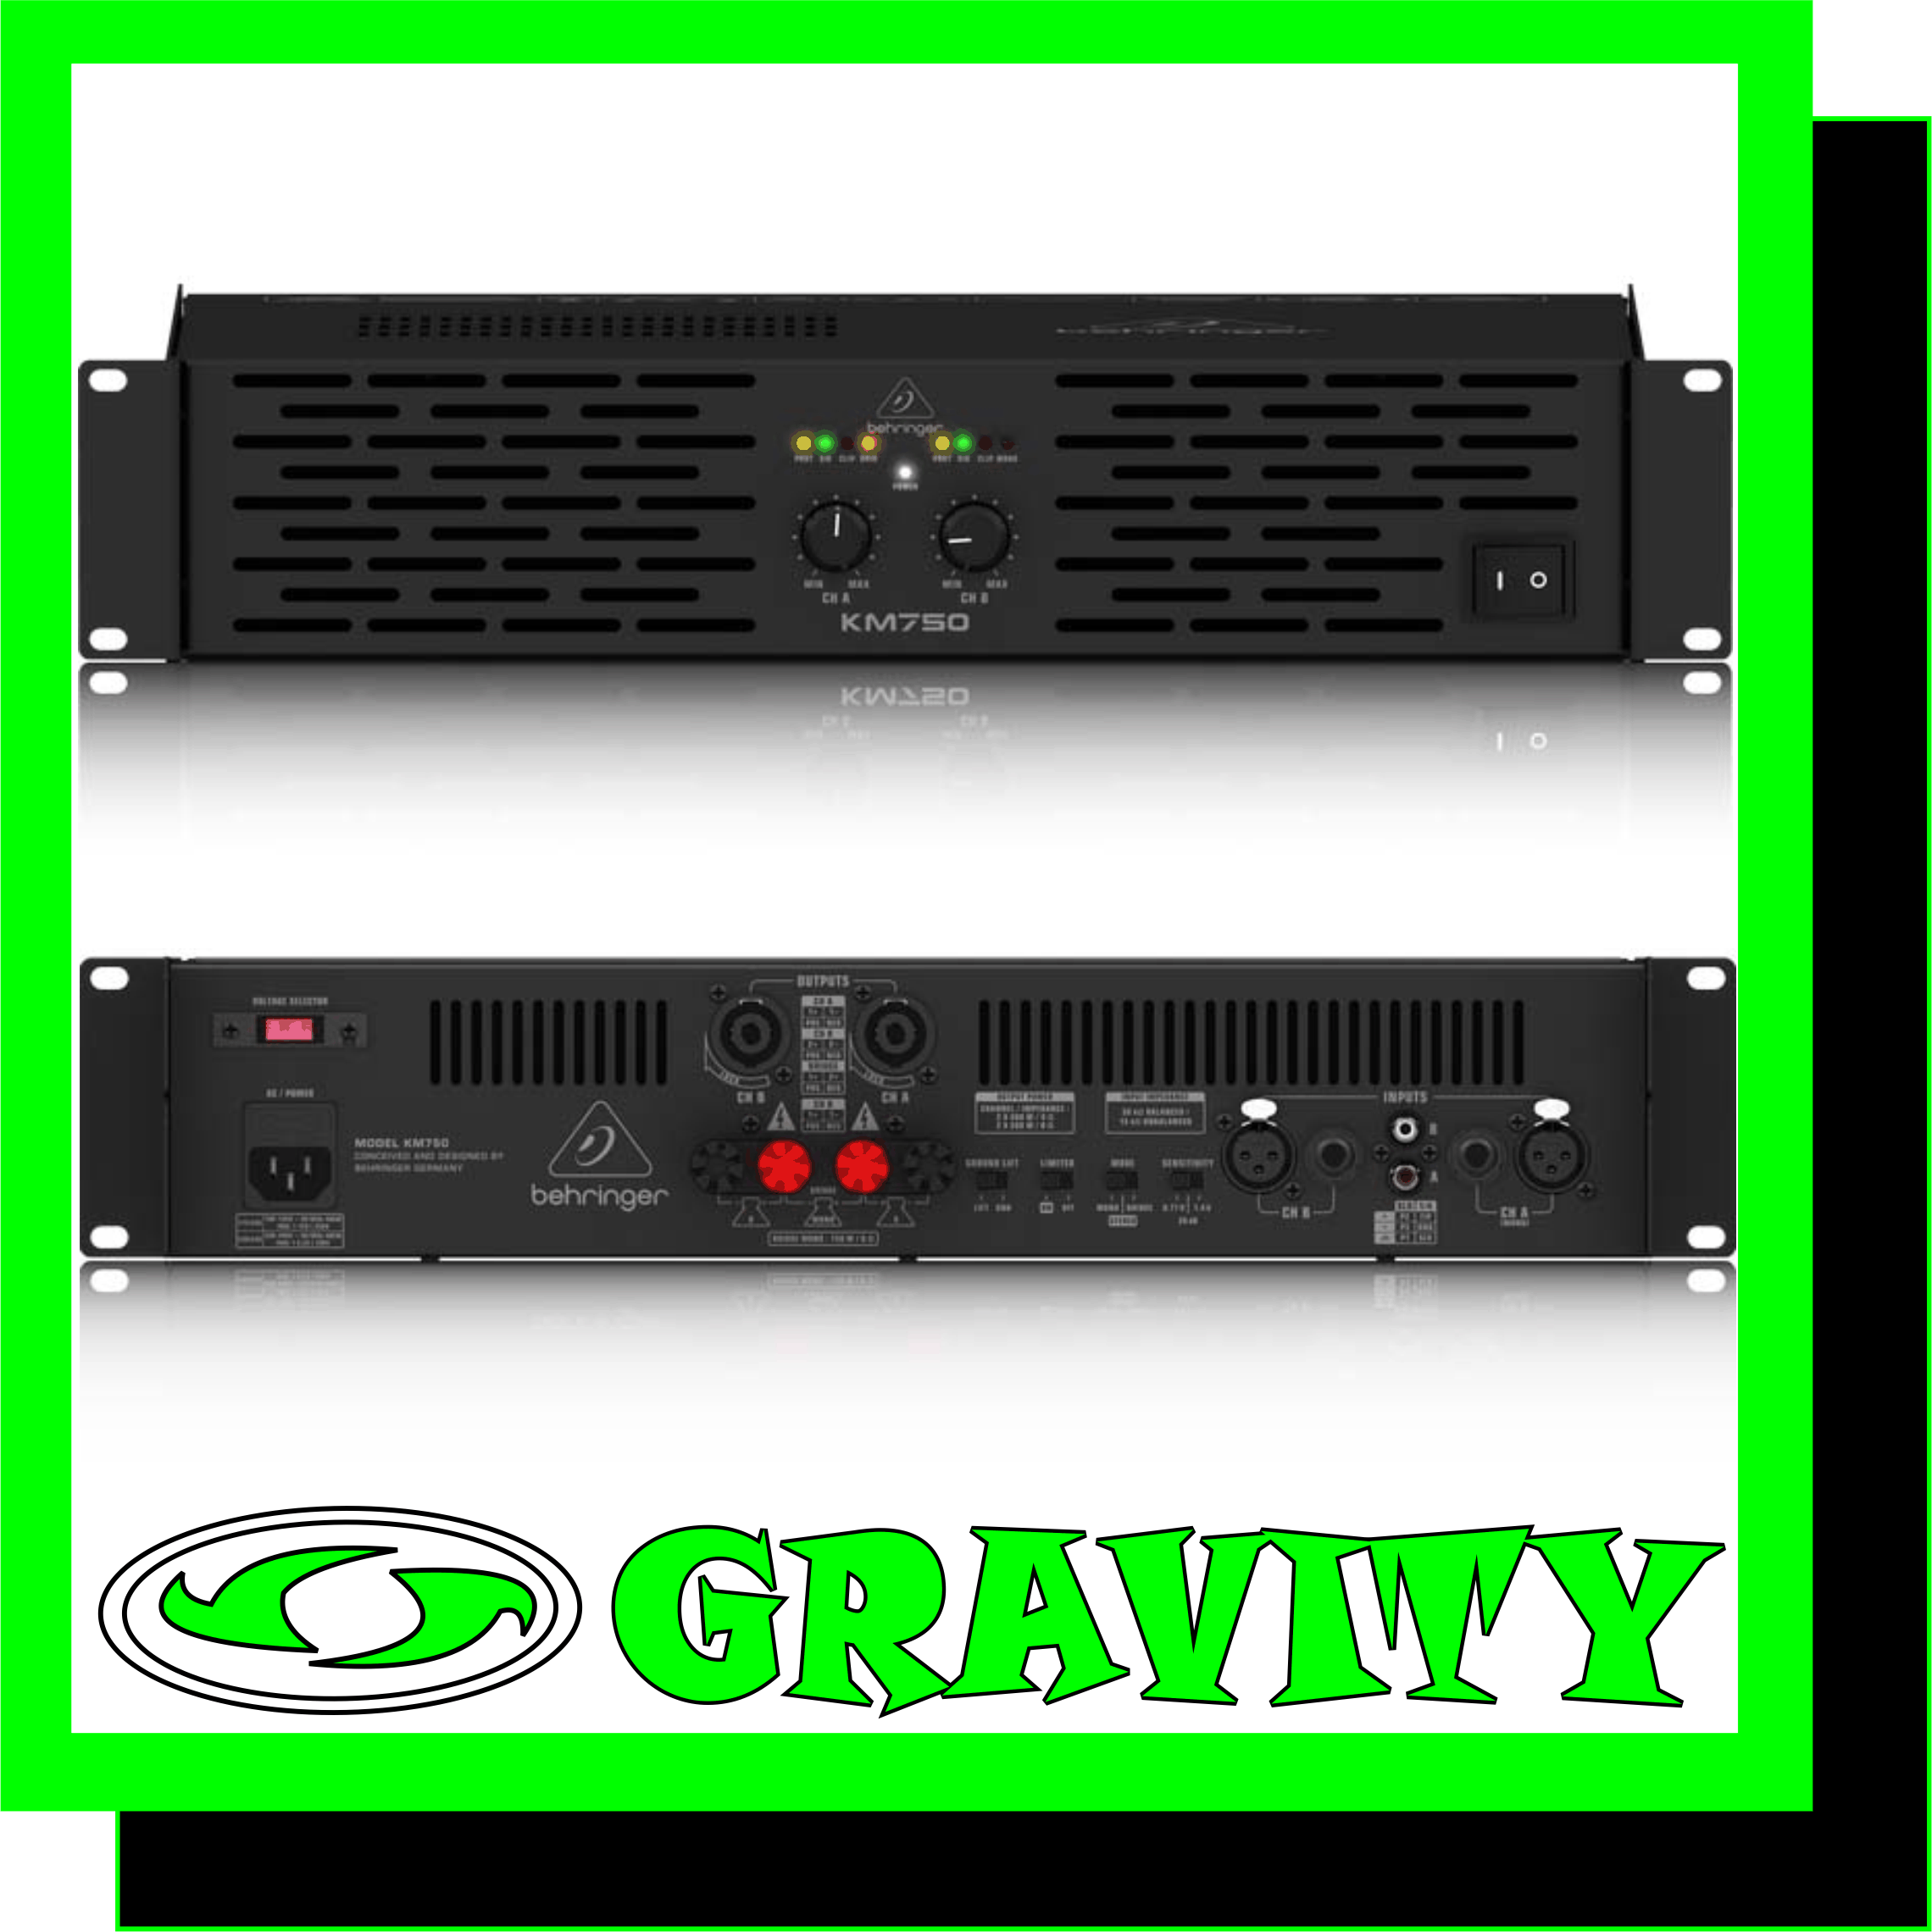 KM750 Professional 750-Watt Stereo Power Amplifier with ATR (Accelerated Transient Response)  -2 x 400 Watts into 4 Ohms; 2 x 200 Watts into 8 Ohms; 750 Watts into 8 Ohms (bridge mode) -ATR (Accelerated Transient Response) technology for ultimate punch and clarity -Switchable limiters offer maximum output level with reliable overload protection -Precise power, signal and clip LEDs to monitor performance -XLR, 1/4” TRS and RCA input connectors for compatibility with any source -Professional speaker connectors and “touch-proof” binding posts support most speaker wiring systems -Independent DC and short circuit protection on each channel automatically protects amplifier and speakers -High-current toroidal transformer for ultra-high transient response and absolute reliability -Active cooling on heatsink -“Built-like-a-tank” impact-resistant, all-steel 2U rackmount chassis  KM750 The remarkable KM750 packs a heart-stopping 750 Watts of output power into a lightweight (18.7 lbs/8.5 kg) package, thanks to our Accelerated Transient Response (ATR) technology. Ample power (750 Watts in Bridge mode; 2 x 400 Watts @ 4 Ohms; 2 x 200 Watts @ 8 Ohms) and high-tech efficiency combine, giving you a supercharged workhorse that will keep your rig kicking for years and years to come.   Accelerated Transient Response Delivers the Knockout Punch It takes huge pulses of energy (current and voltage) to propel a woofer cone out fast enough to match a bass beat. That’s called Transient Response and it’s the holy grail of amp design. By carefully selecting transistors with extremely high slew rates and optimizing other proprietary parts of our circuitry, our amps are able to react instantly to even the most demanding electronic bass impulses. If the woofers in your PA system can keep up, your audience will hear a tighter, crisper, more natural sound.  Instead of operating relatively continuously like most power amps, the KM750 features rail tracking for effectively modulating the power supply rails with only the peaks of the input signal. This technology has revolutionized pro audio amp designs with its outstanding performance and efficiency.  Sublimely Simple Operation The front panel controls and indicators provide your system’s vital signs at a glance. After pressing the Power button, the Power LED lights to show the amp is ready for action. All channels feature positive-detent Gain controls with Signal LEDs that light when a signal is present, as well as Clip LEDs that alert to reduce the input signal.  Just as elegant as the front, the rear panel is home to balanced XLR and ¼ ” TRS, plus unbalanced ¼ ” TS and RCA connections. Take your pick of professional locking speaker Outputs or touch-proof binding posts to securely connect speakers. The same panel contains the switches that put the KM750 in Mono, Stereo (two channel mode) or mono Bridge mode. Flick the Limiter On/Off switch to activate the built-in overload protection.   Sound Value The remarkable KM750 power amp was built for the working musician. It is exceptionally light, packs a massive 750 Watts of output power, thanks to our Accelerated Transient Response (ATR) technology and is built rugged enough for life on the road. Plus, the KM750’s ultra-light price tag will leave cash left over for you to get more stuff to amplify! Check out the KM750 at your BEHRINGER dealer